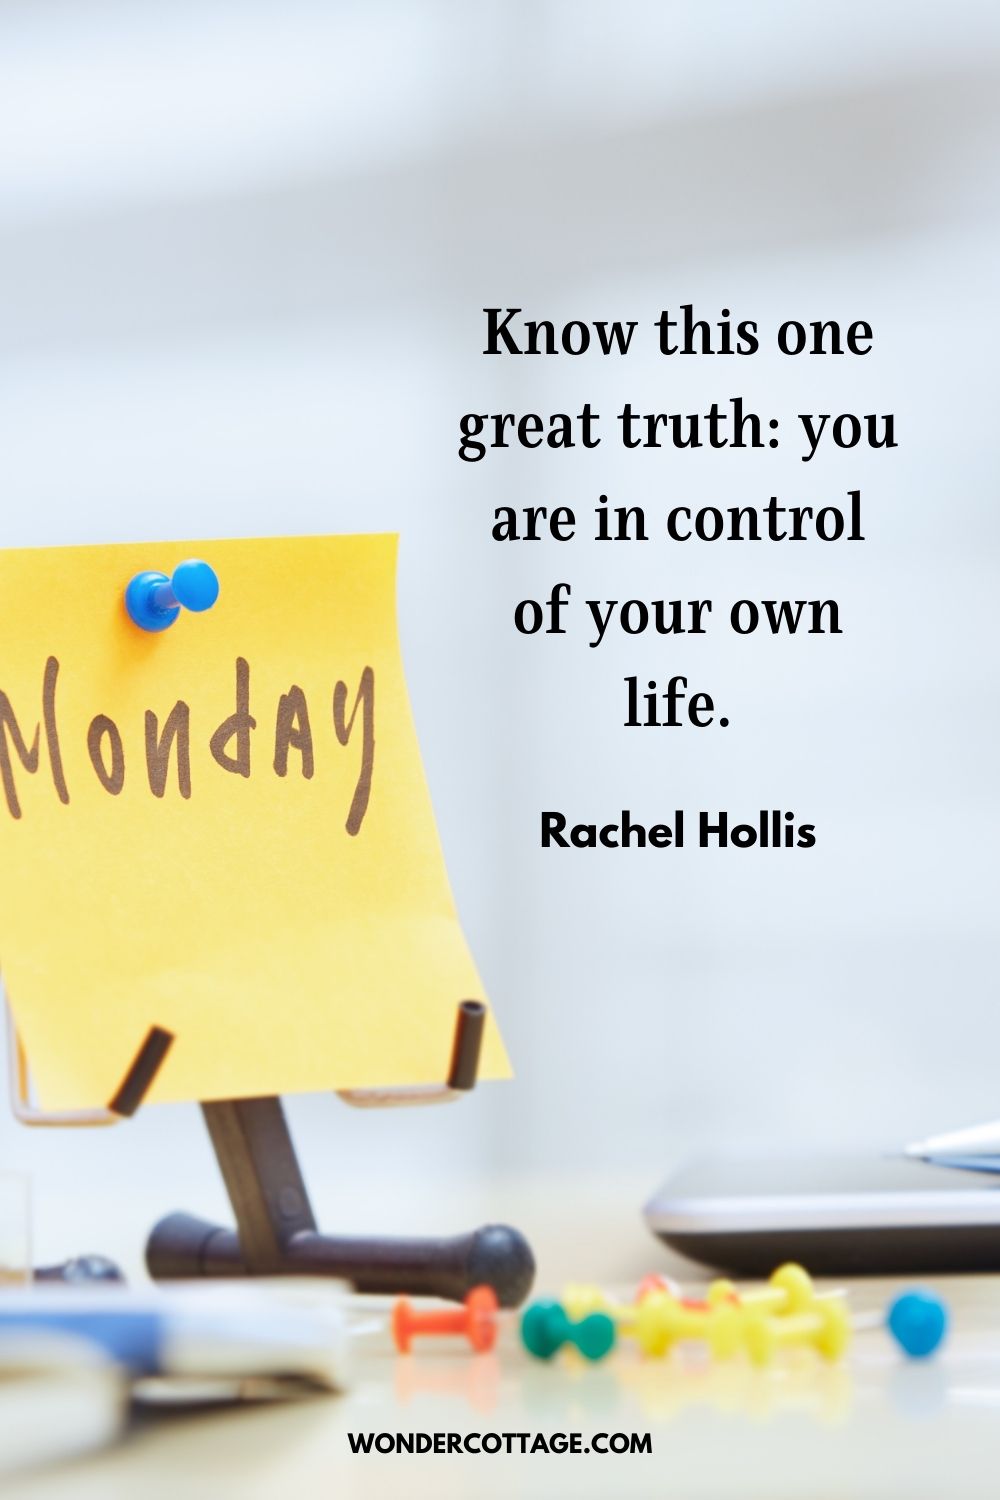 Know this one great truth: you are in control of your own life. Rachel Hollis